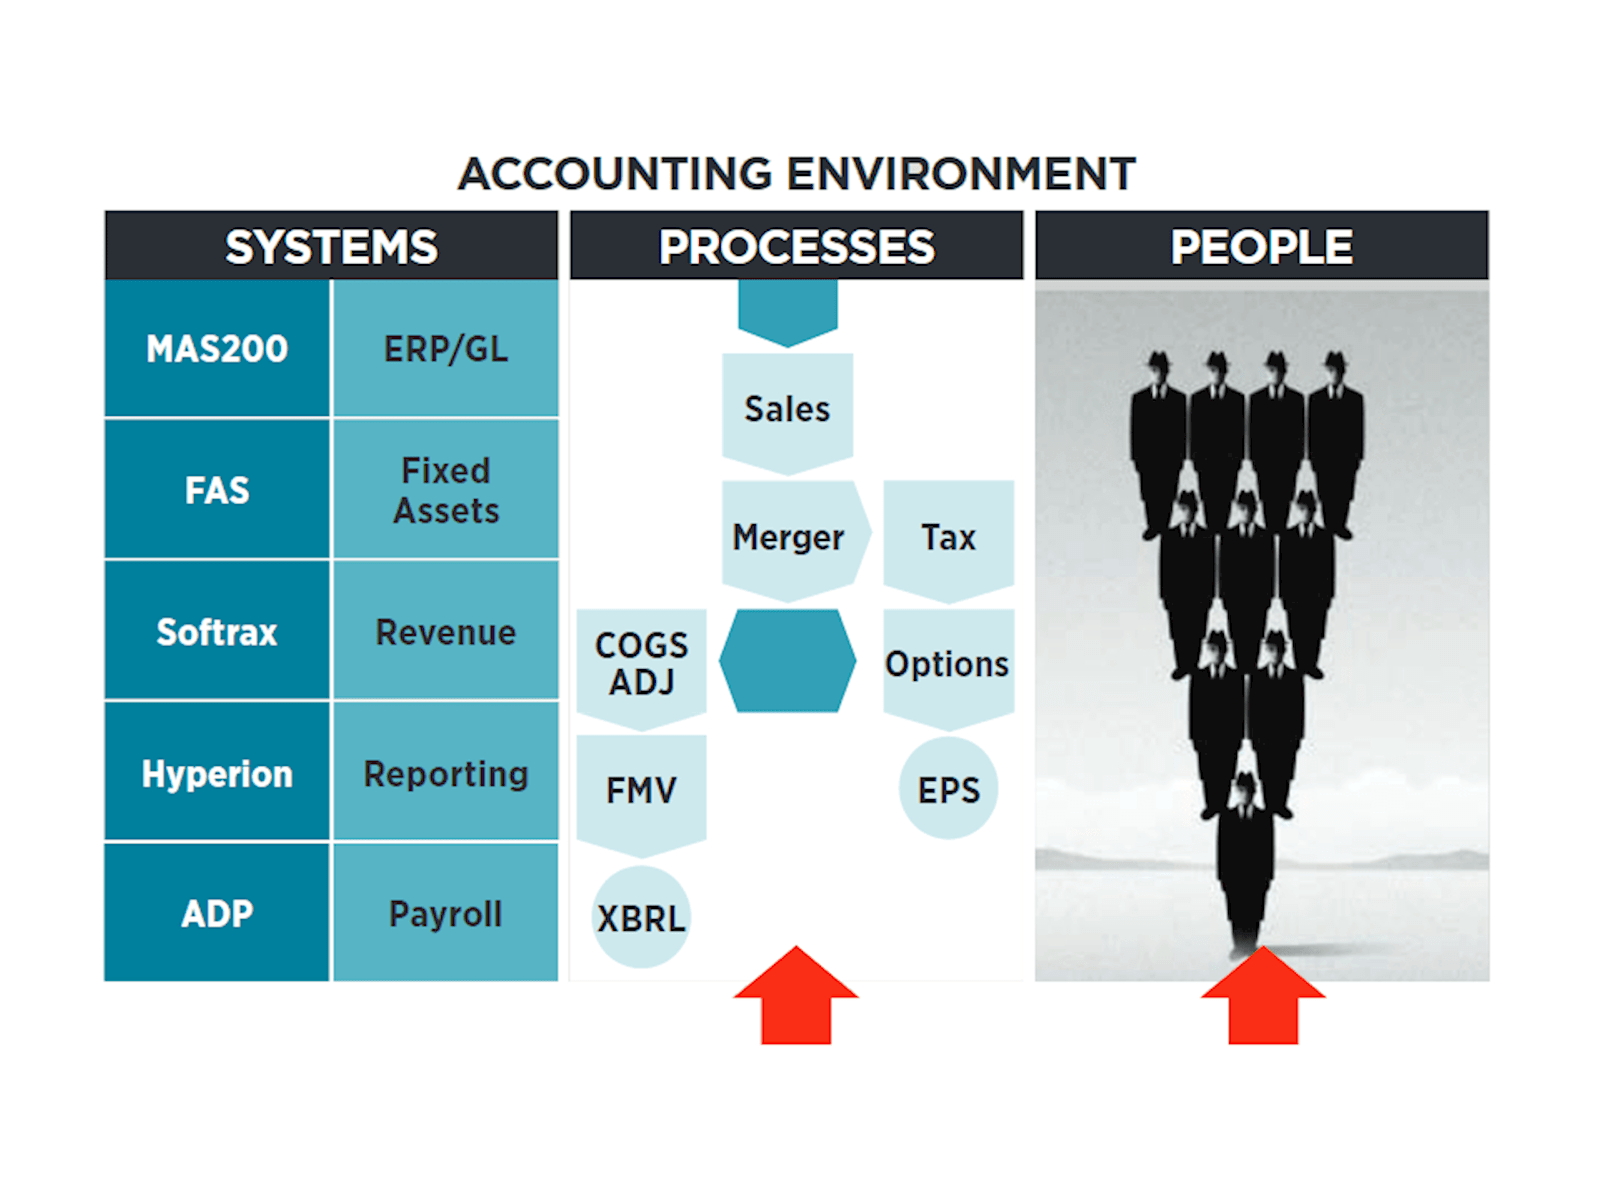 Figure setting out systems, processes, and people in the accounting environment.